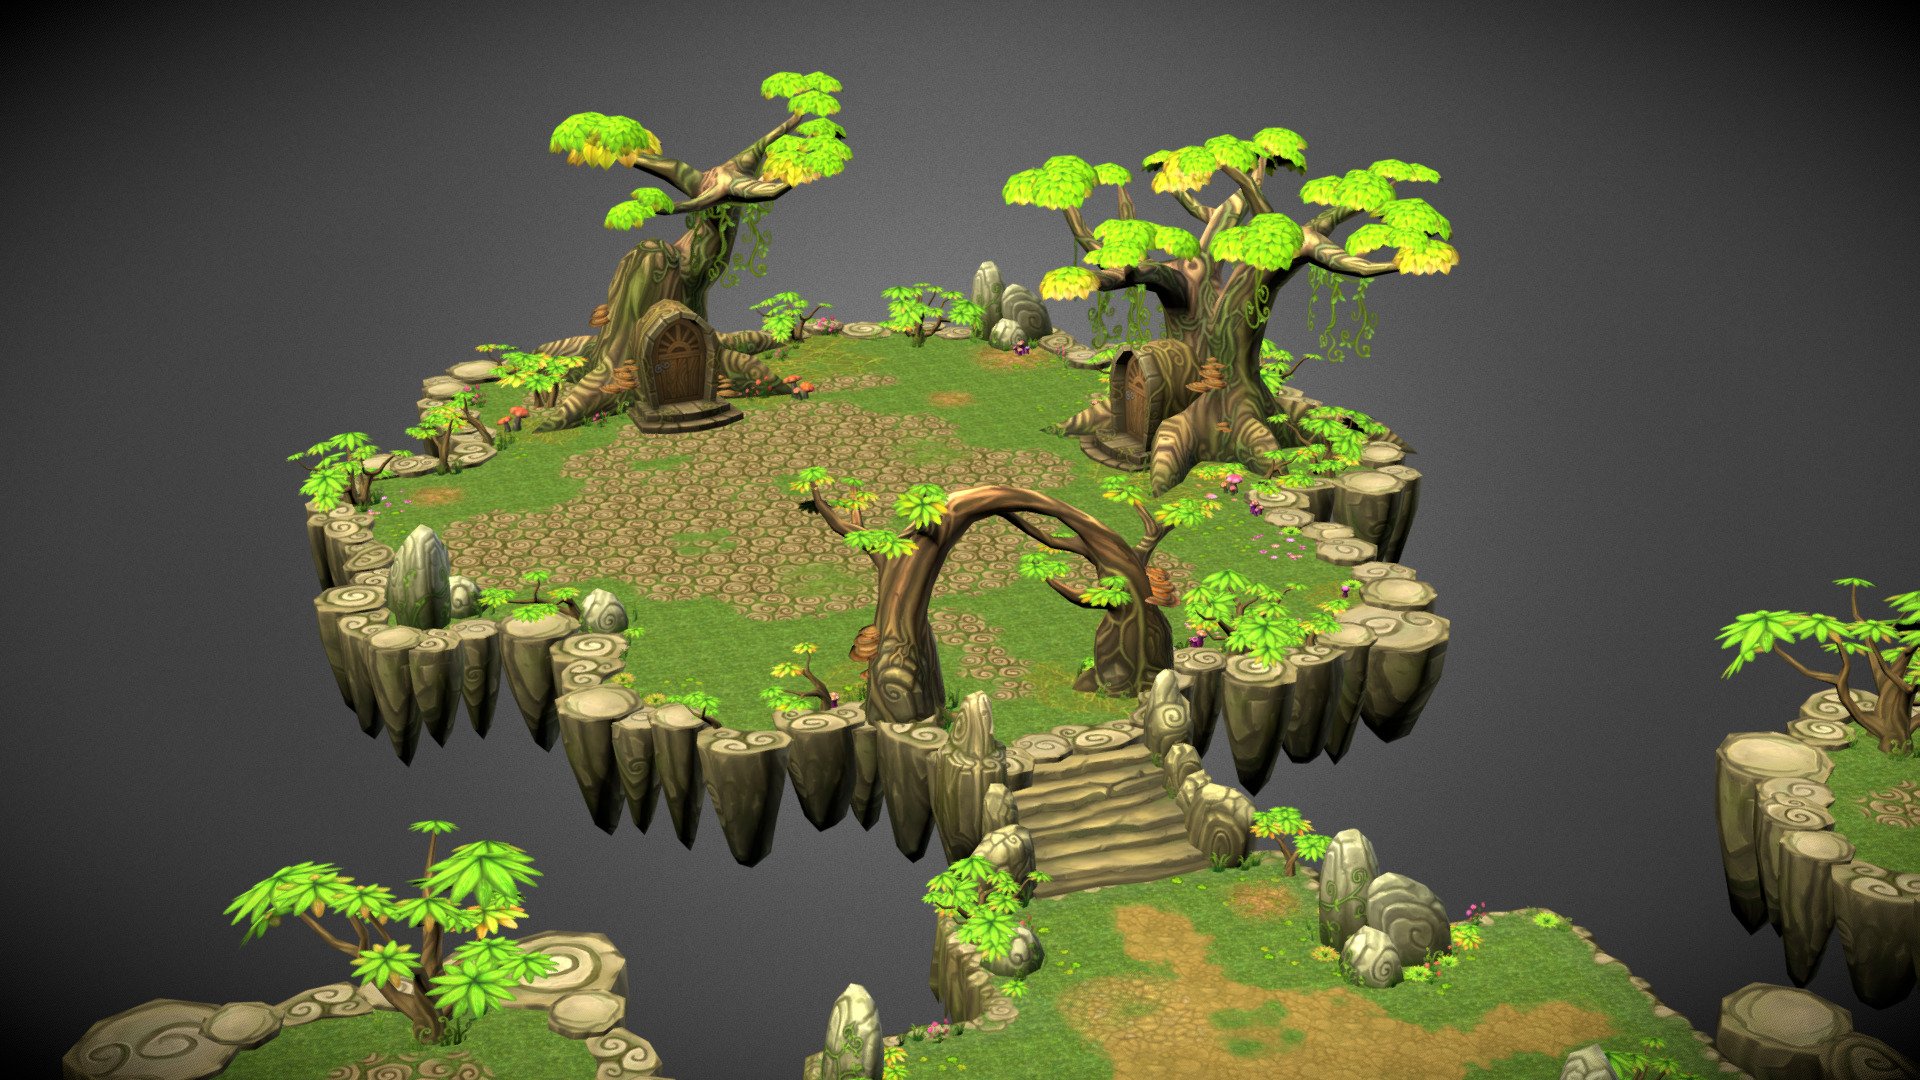 Let's get started on your fantasy game with this low poly and hand-painted 3D asset. Most elements here can be reshaped, re-arrange and assemble so quickly and easy to form a new floating islands and fantasy environment.
The models use one texture atlas at 4094x4096pixel for the environment and assets, two atlas for the floor tiles at 2048x2048pixel!
Update V1.2
- Add some dirt decal and grass decal
- Add winter version

This Floating Islands - Fantasy Environment Pack contains the following models:
-04 Vines
-20 Mushroom variations
-06 Mushroom_wood variations
-08 Grass variations
-03 Mushroom-Grass Decal
-12 Bushs
-03 Trees
-03 Tree House
-03 Big Tree
-03 Tree Rocks
-03 Stairs variations
-04 Fences
-02 Wooden Bridges
-01 Segment
-12 Rocks
-08 Steps Rocks
-20 Wall variations
-10 Big Modulars
-Over 26 Sample Modulars - Floating Islands - Fantasy Environment Pack - Buy Royalty Free 3D model by 3dfancy 3d model